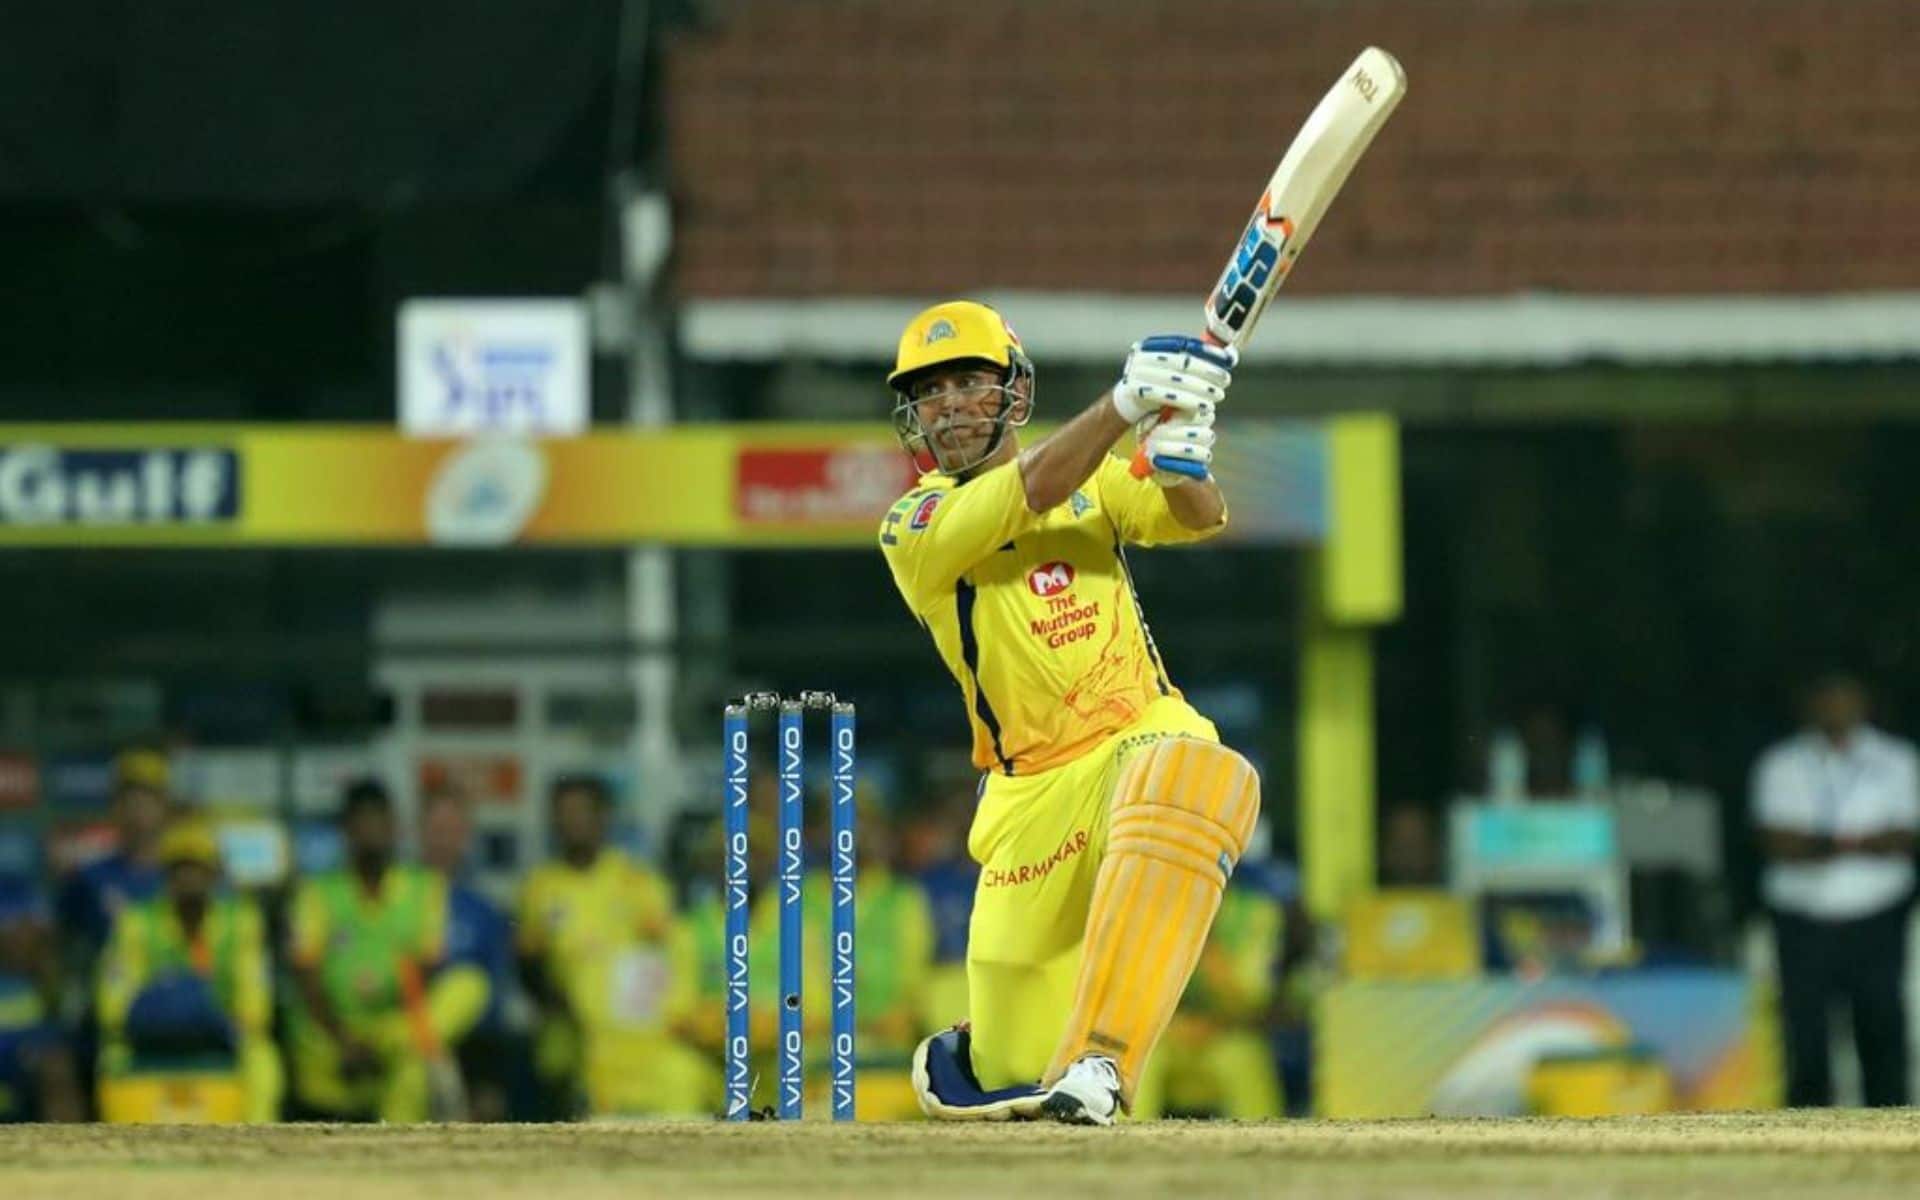 MS Dhoni has 8 fifties with a strike rate of over 200 (X.com)